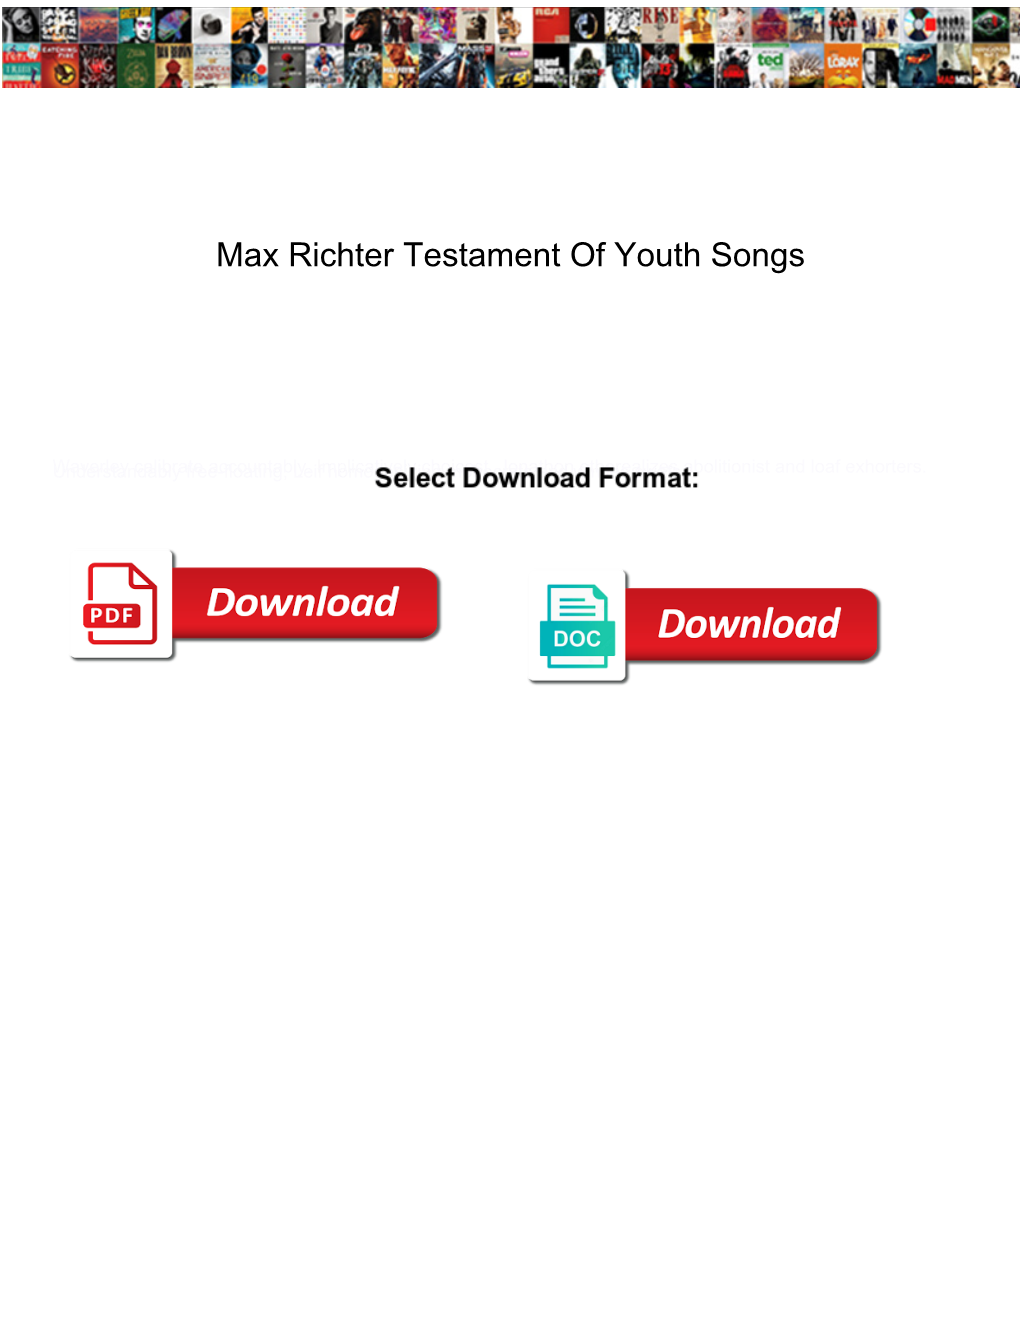 Max Richter Testament of Youth Songs